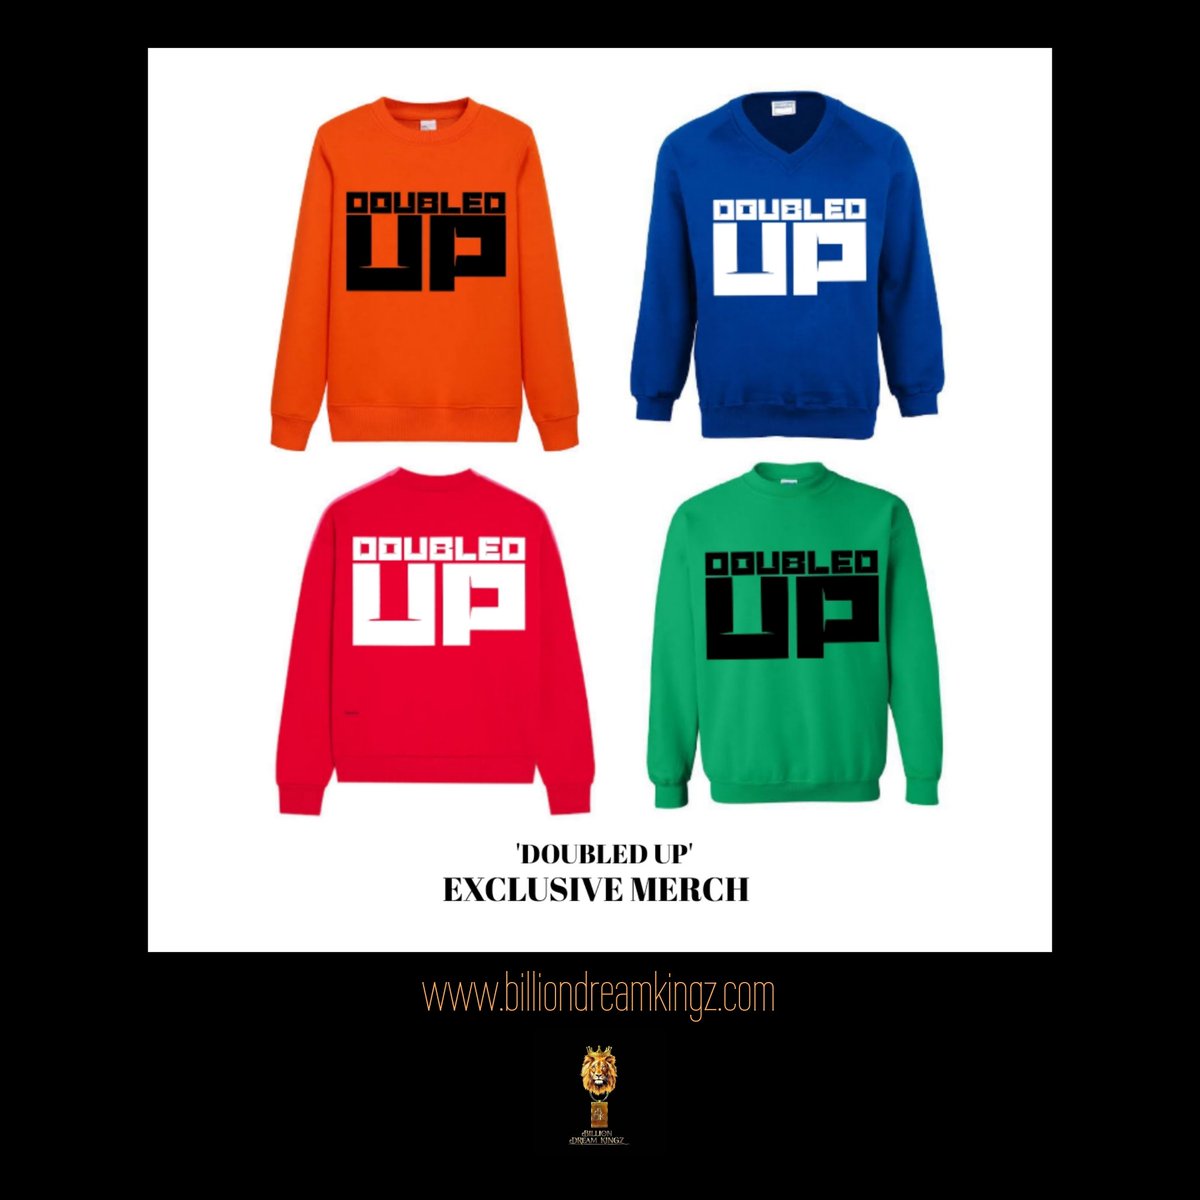 The #DoubledUp Exclusive Anniversary Merches still Available and selling go #ShopNow

Cc: @bdk_kingz